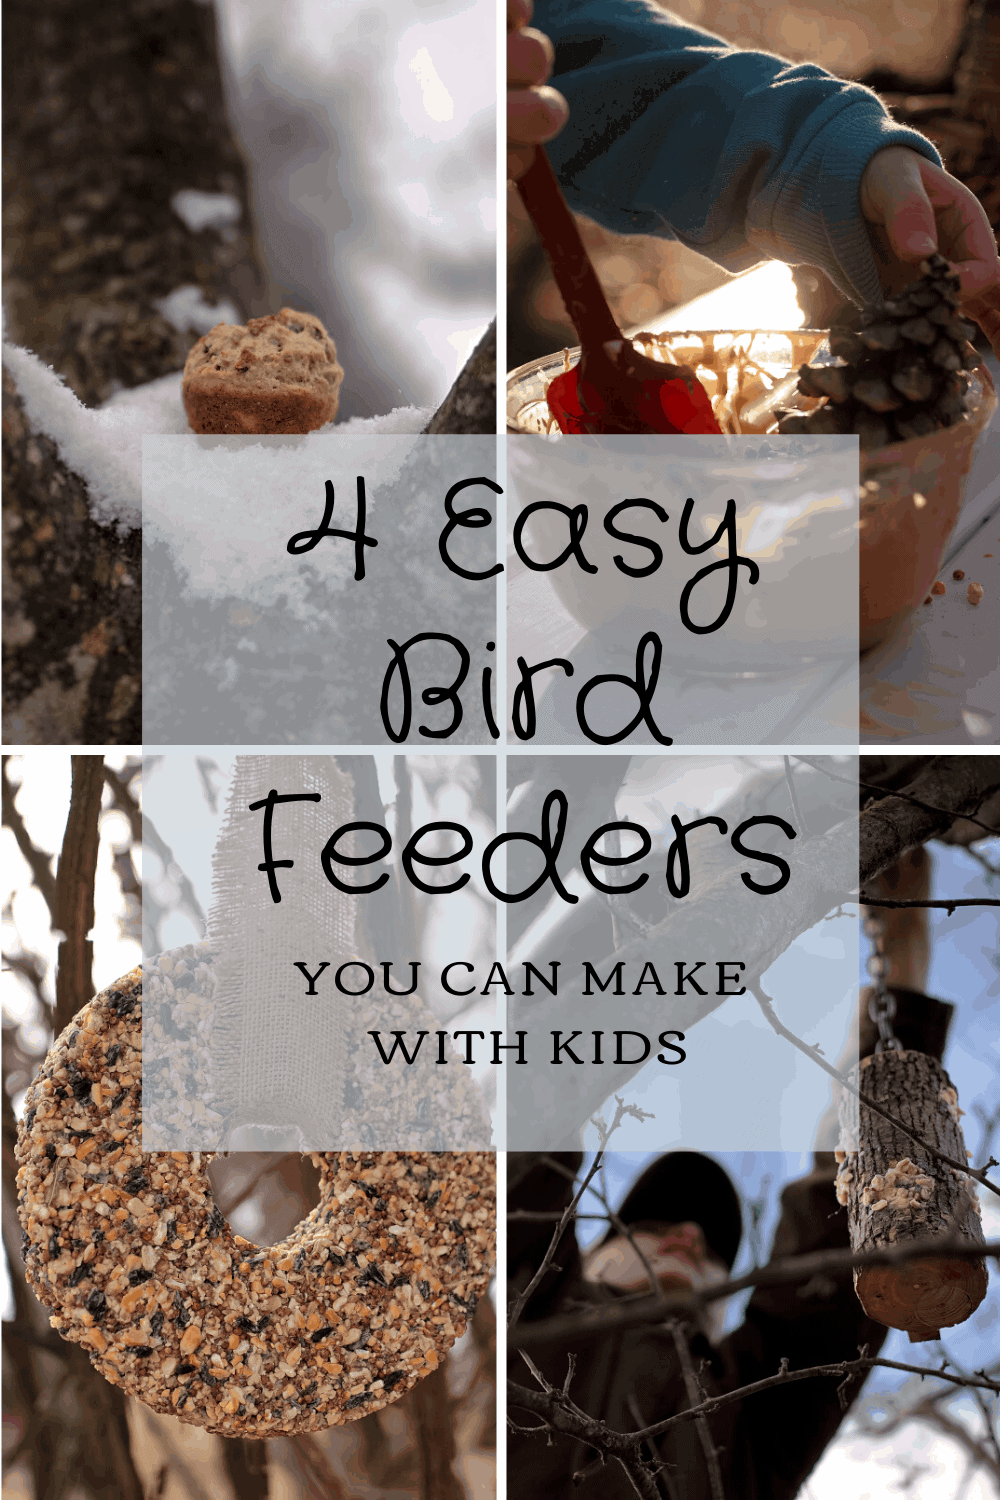 https://runwildmychild.com/wp-content/uploads/2020/01/Easy-Bird-feeders-you-can-make-with-kids-1.png